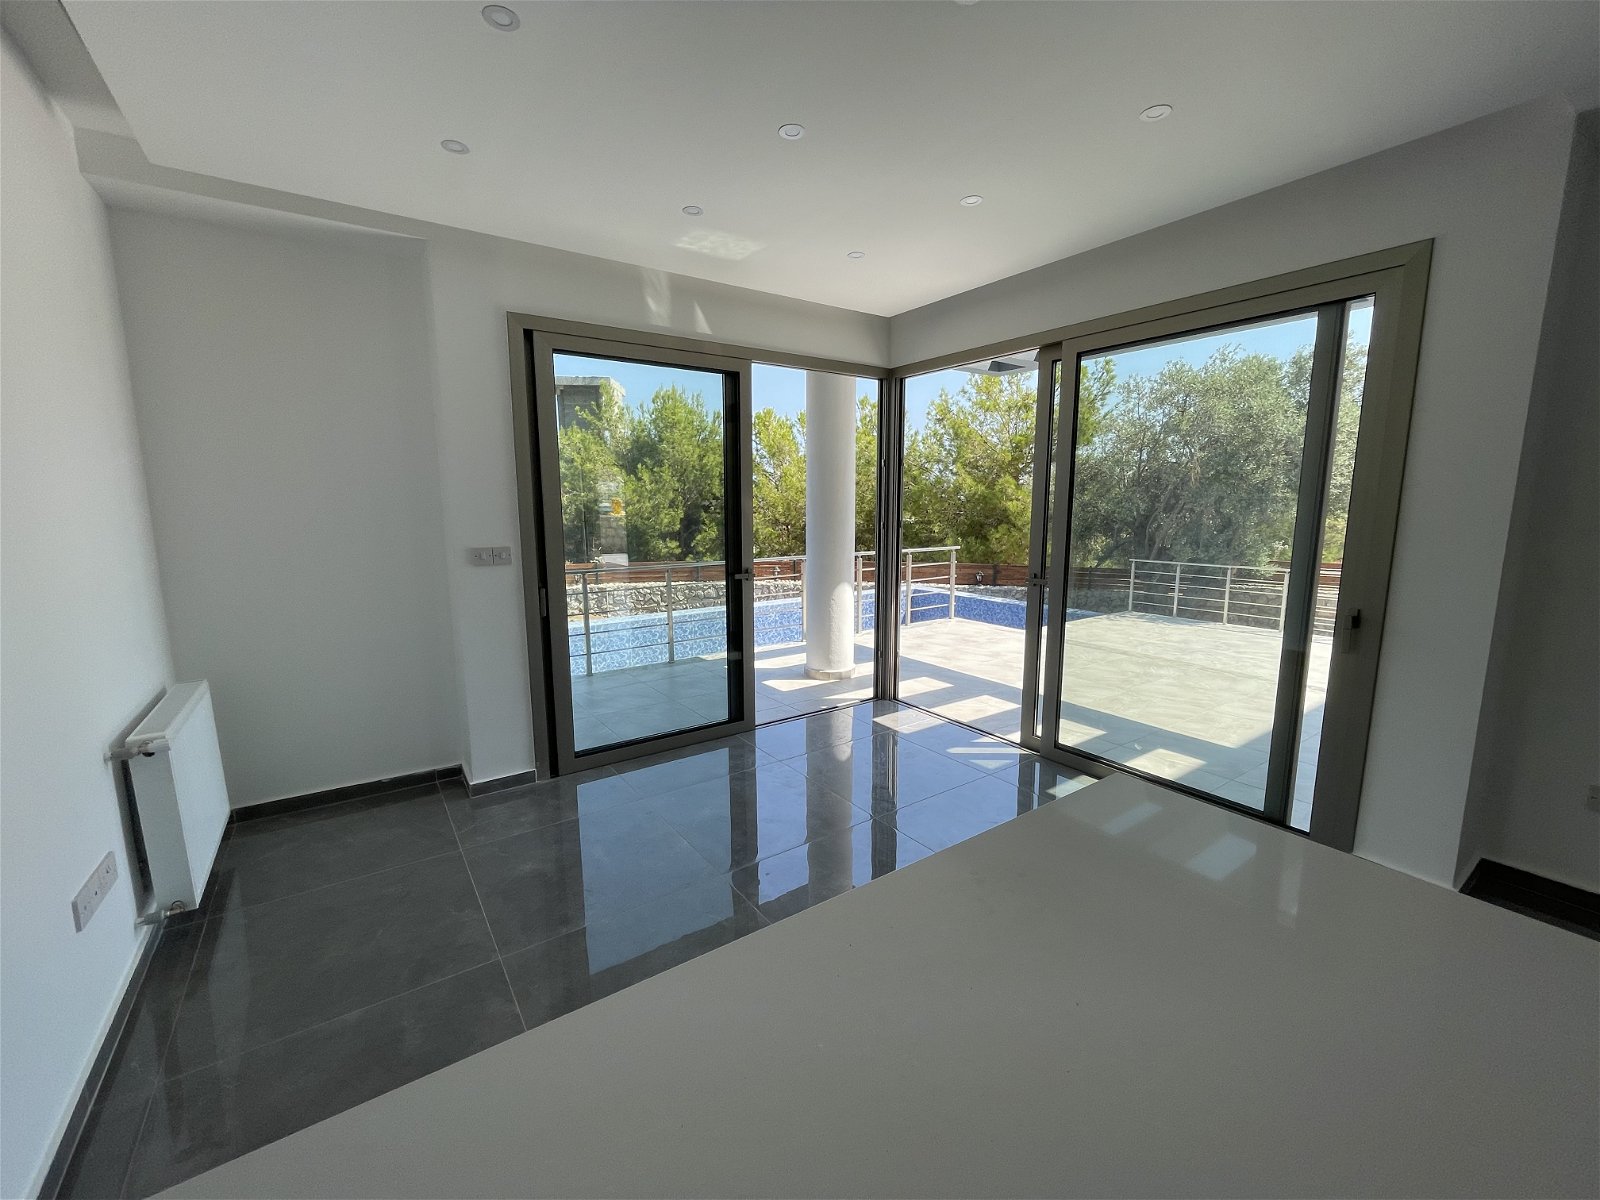 Stunning 3+1 Modern Villa with Sea and Mountain Views in Catalkoy, Kyrenia-515190eb-fa5a-48ec-97be-3d9b522a05c2